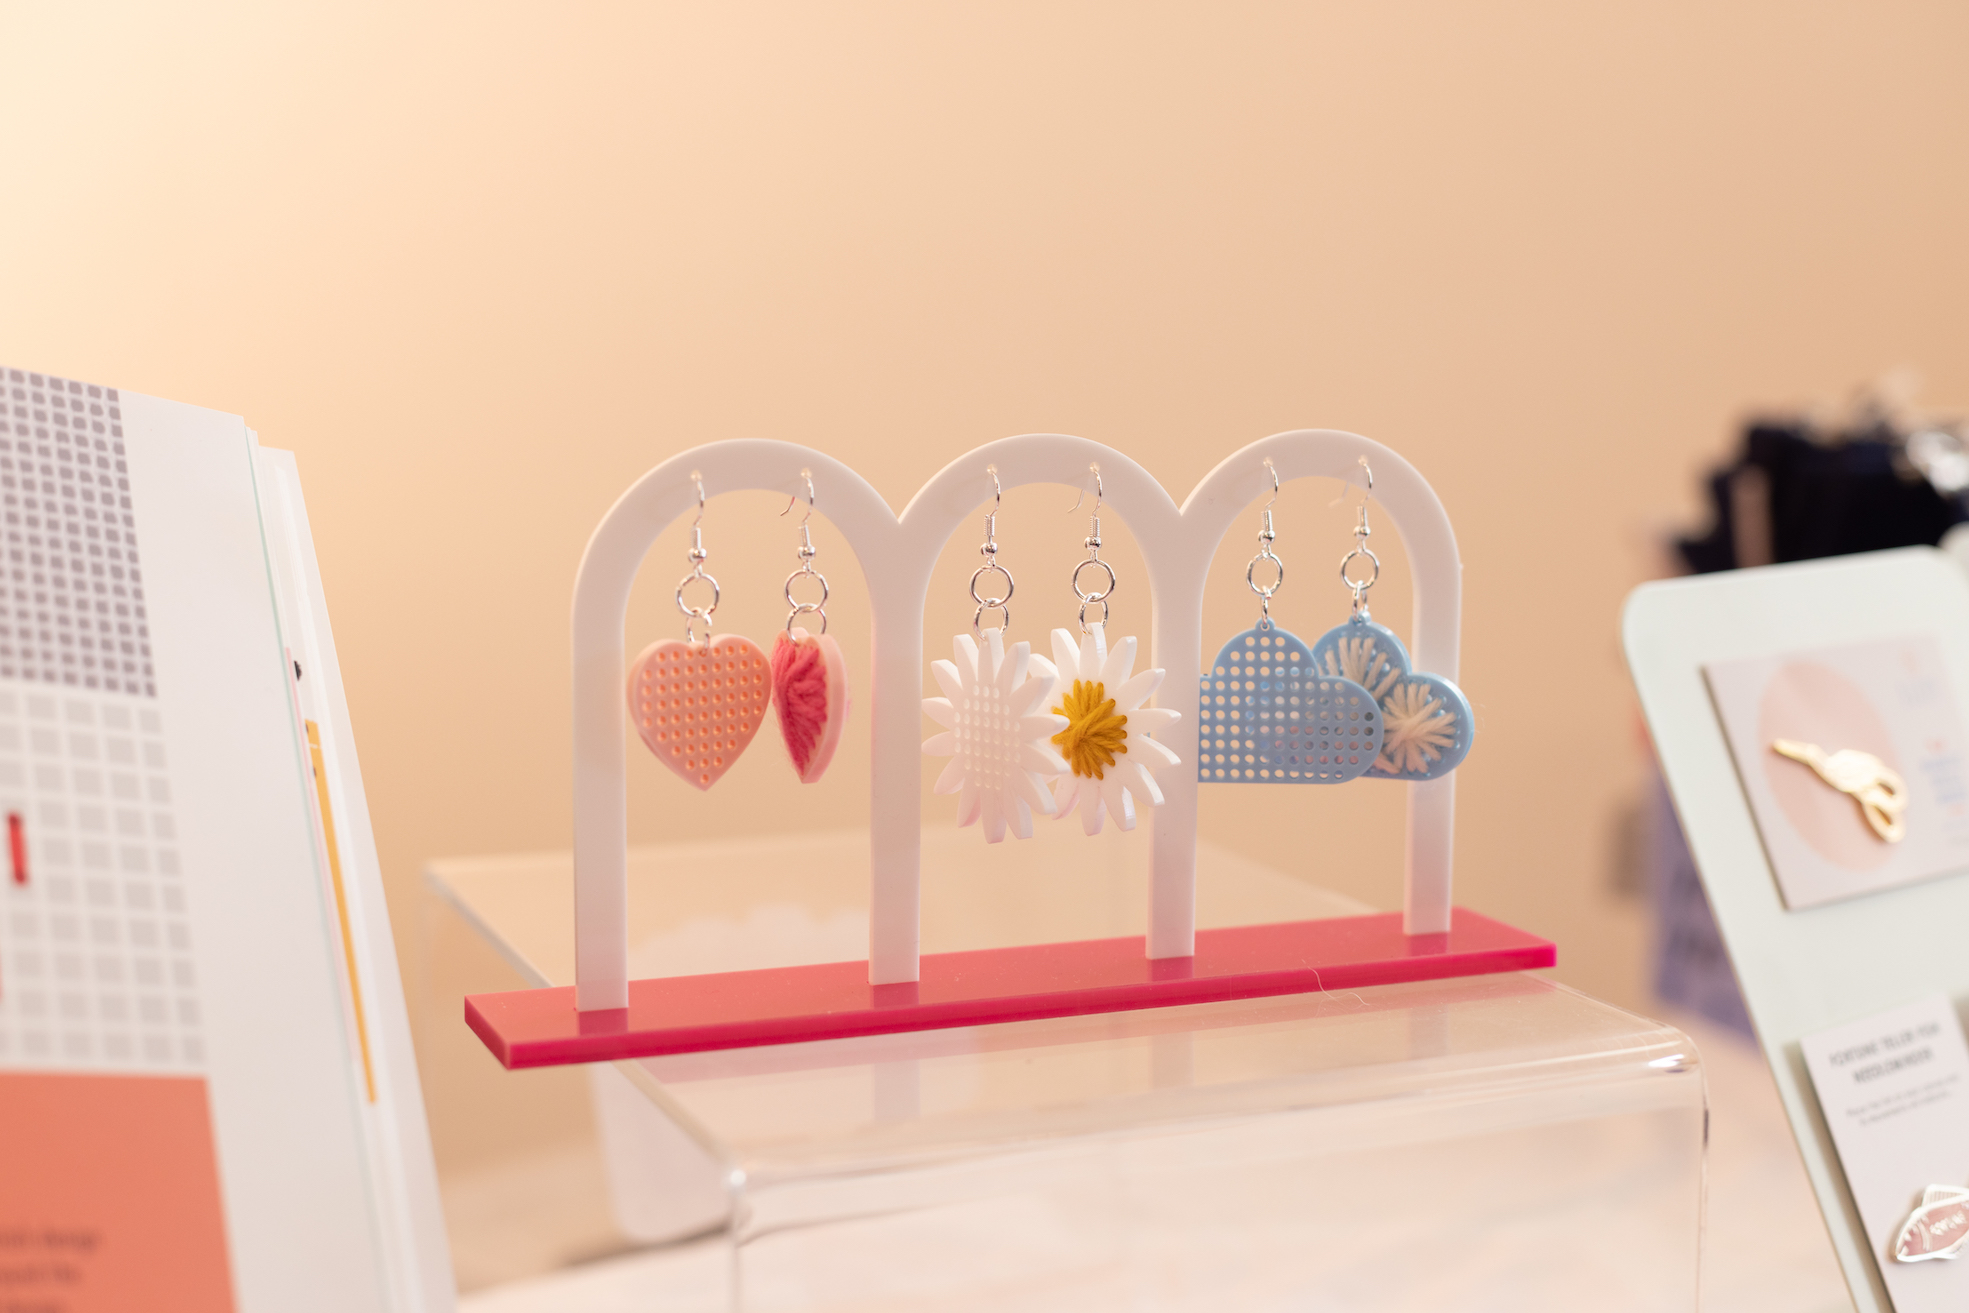 Acrylic earrings with stitchable middles hang from a display stand.